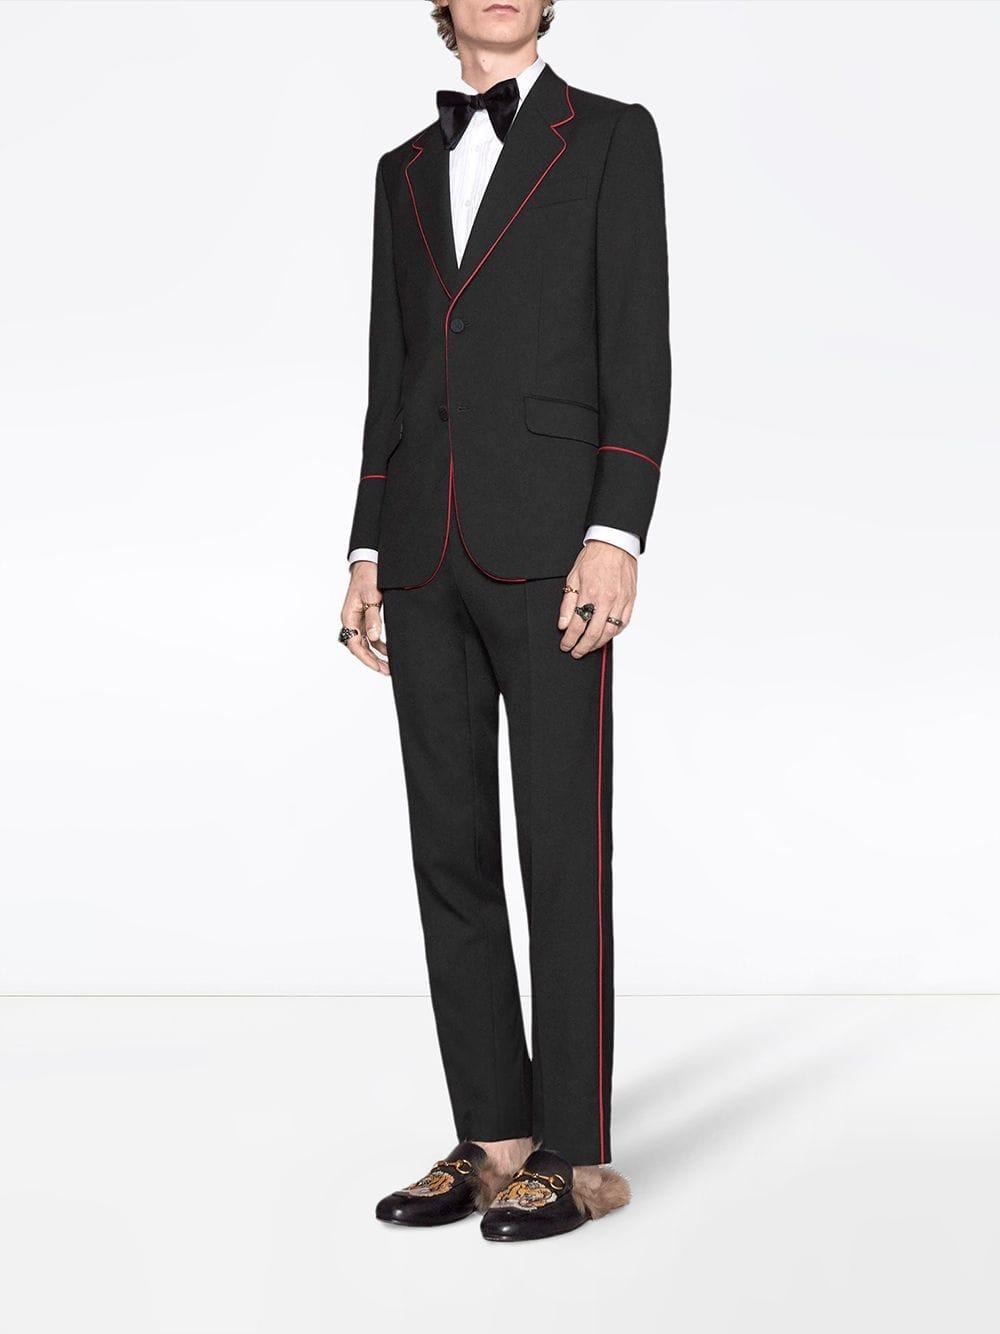 Gucci Heritage Tuxedo With Piping in Black for Men - Lyst